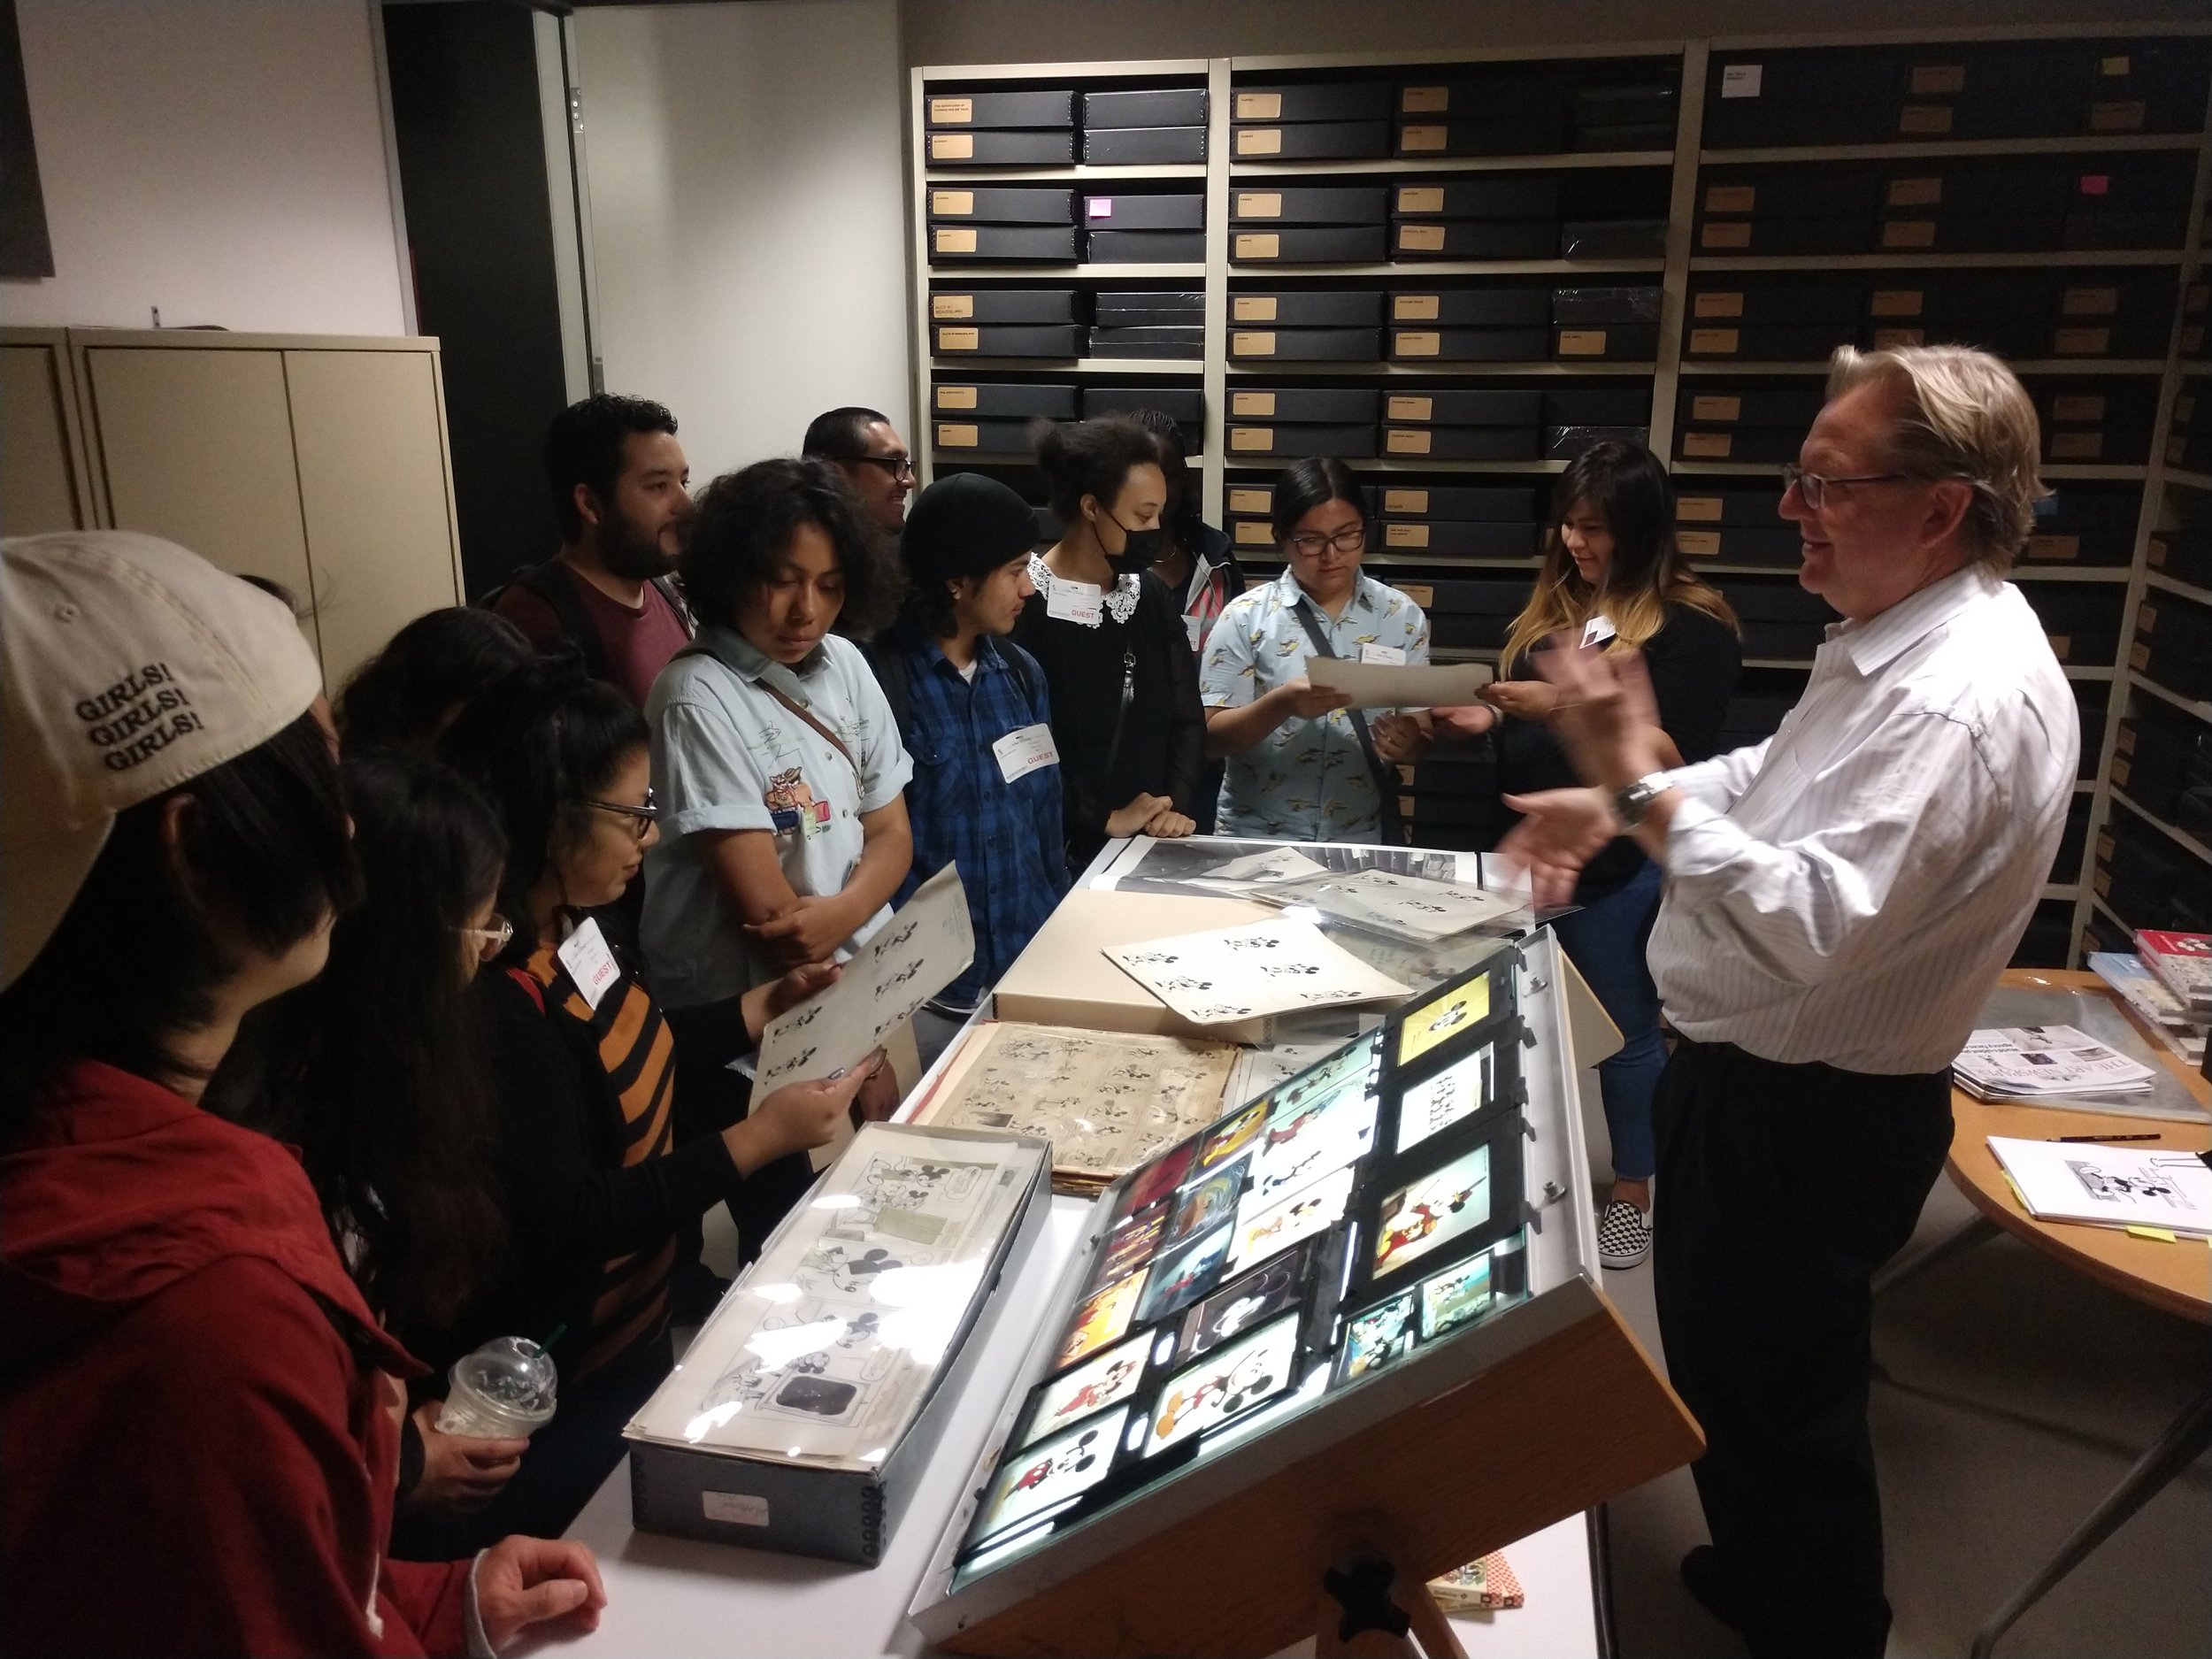 Ken Shue, Head of Art &amp; Design, Disney Publishing World Wide - explores art dating back to 1928 with students in the Disney Publishing Archive